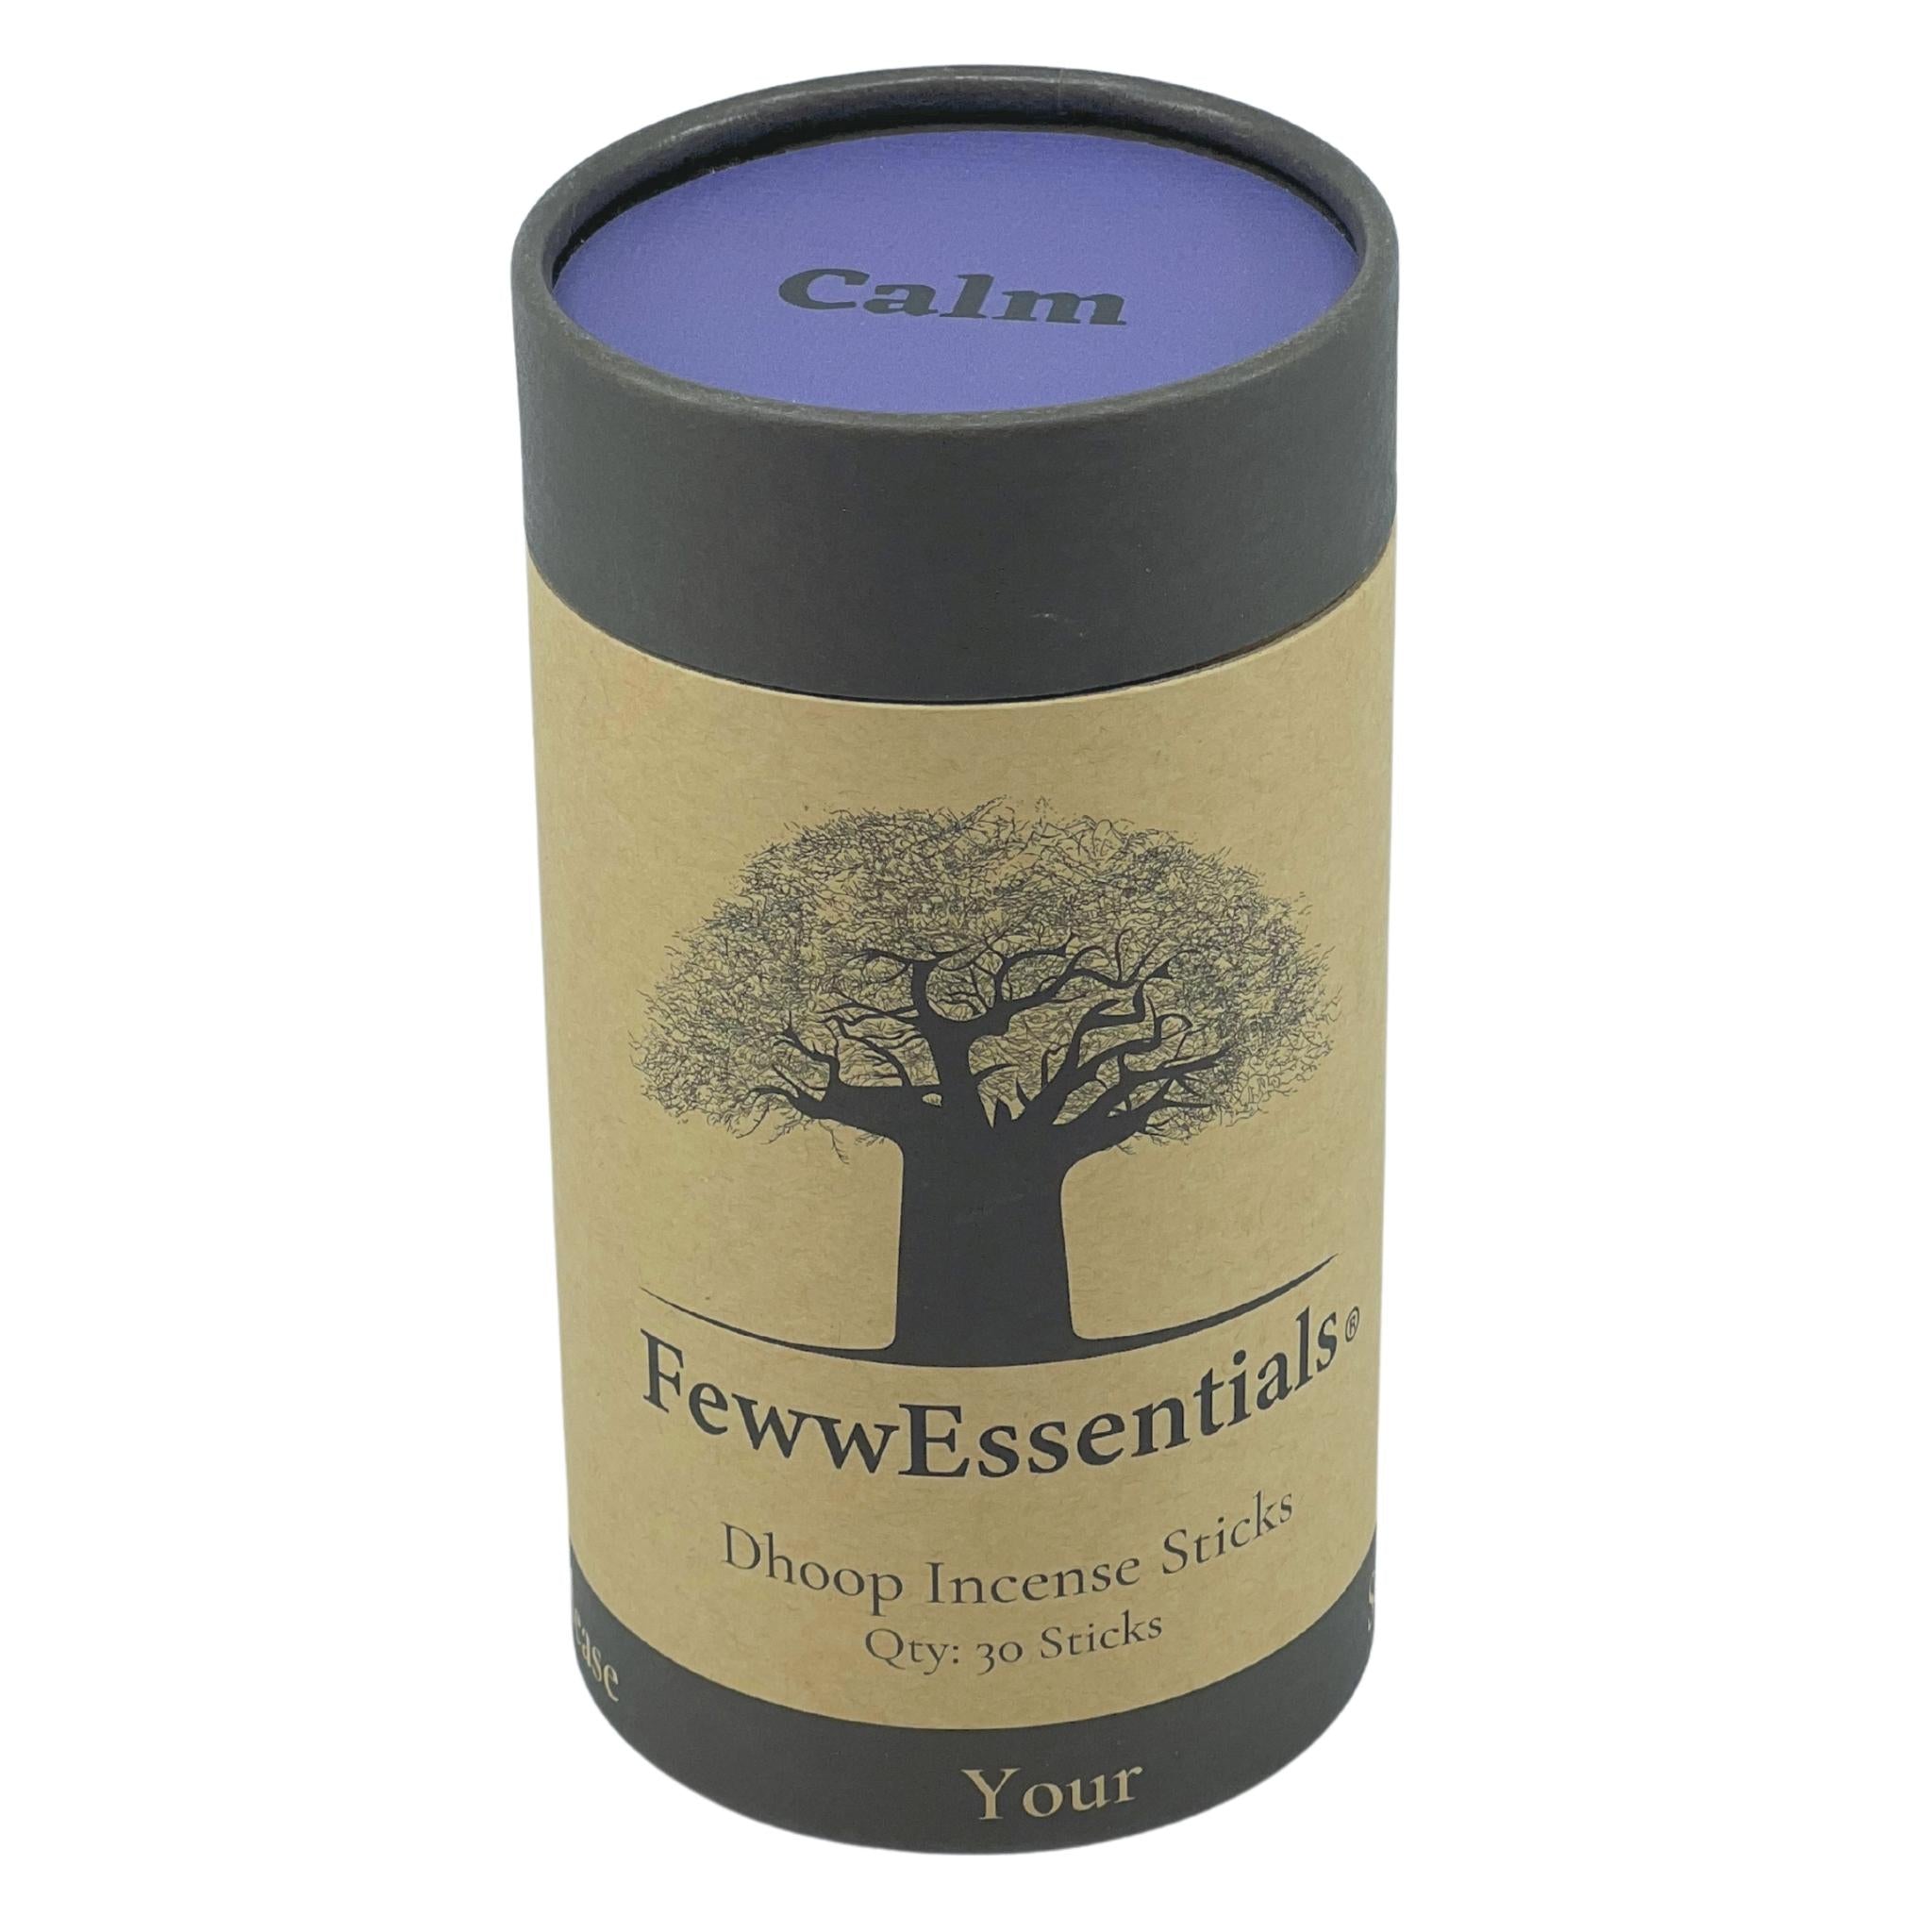 Image of FewwEssentials Dhoop Incense Sticks with the scent name Calm in a Circular Kraft Brown Box with Purple Lid